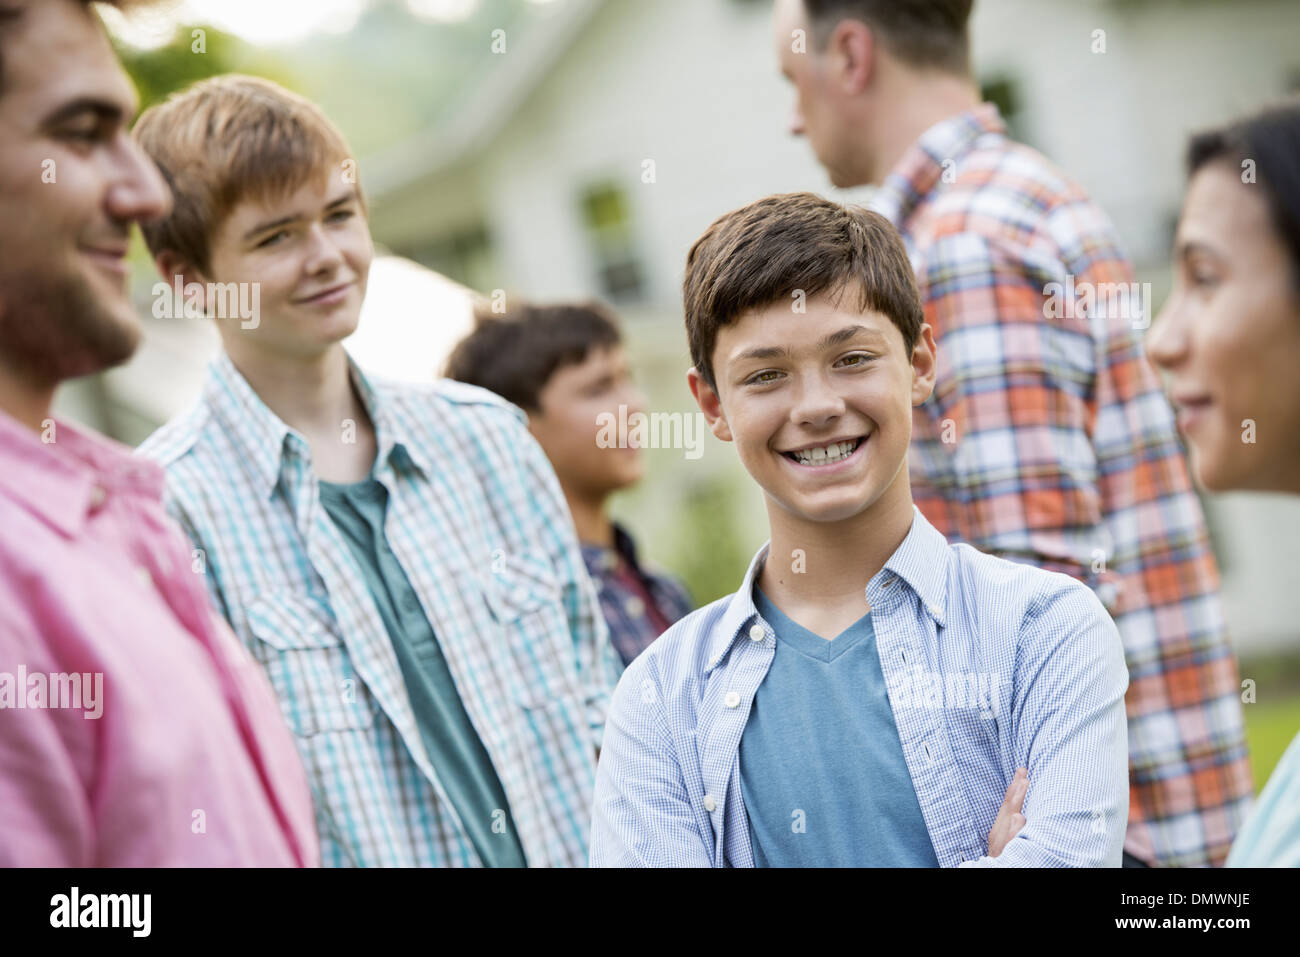 group of people adults and teenagers summer party. Stock Photo